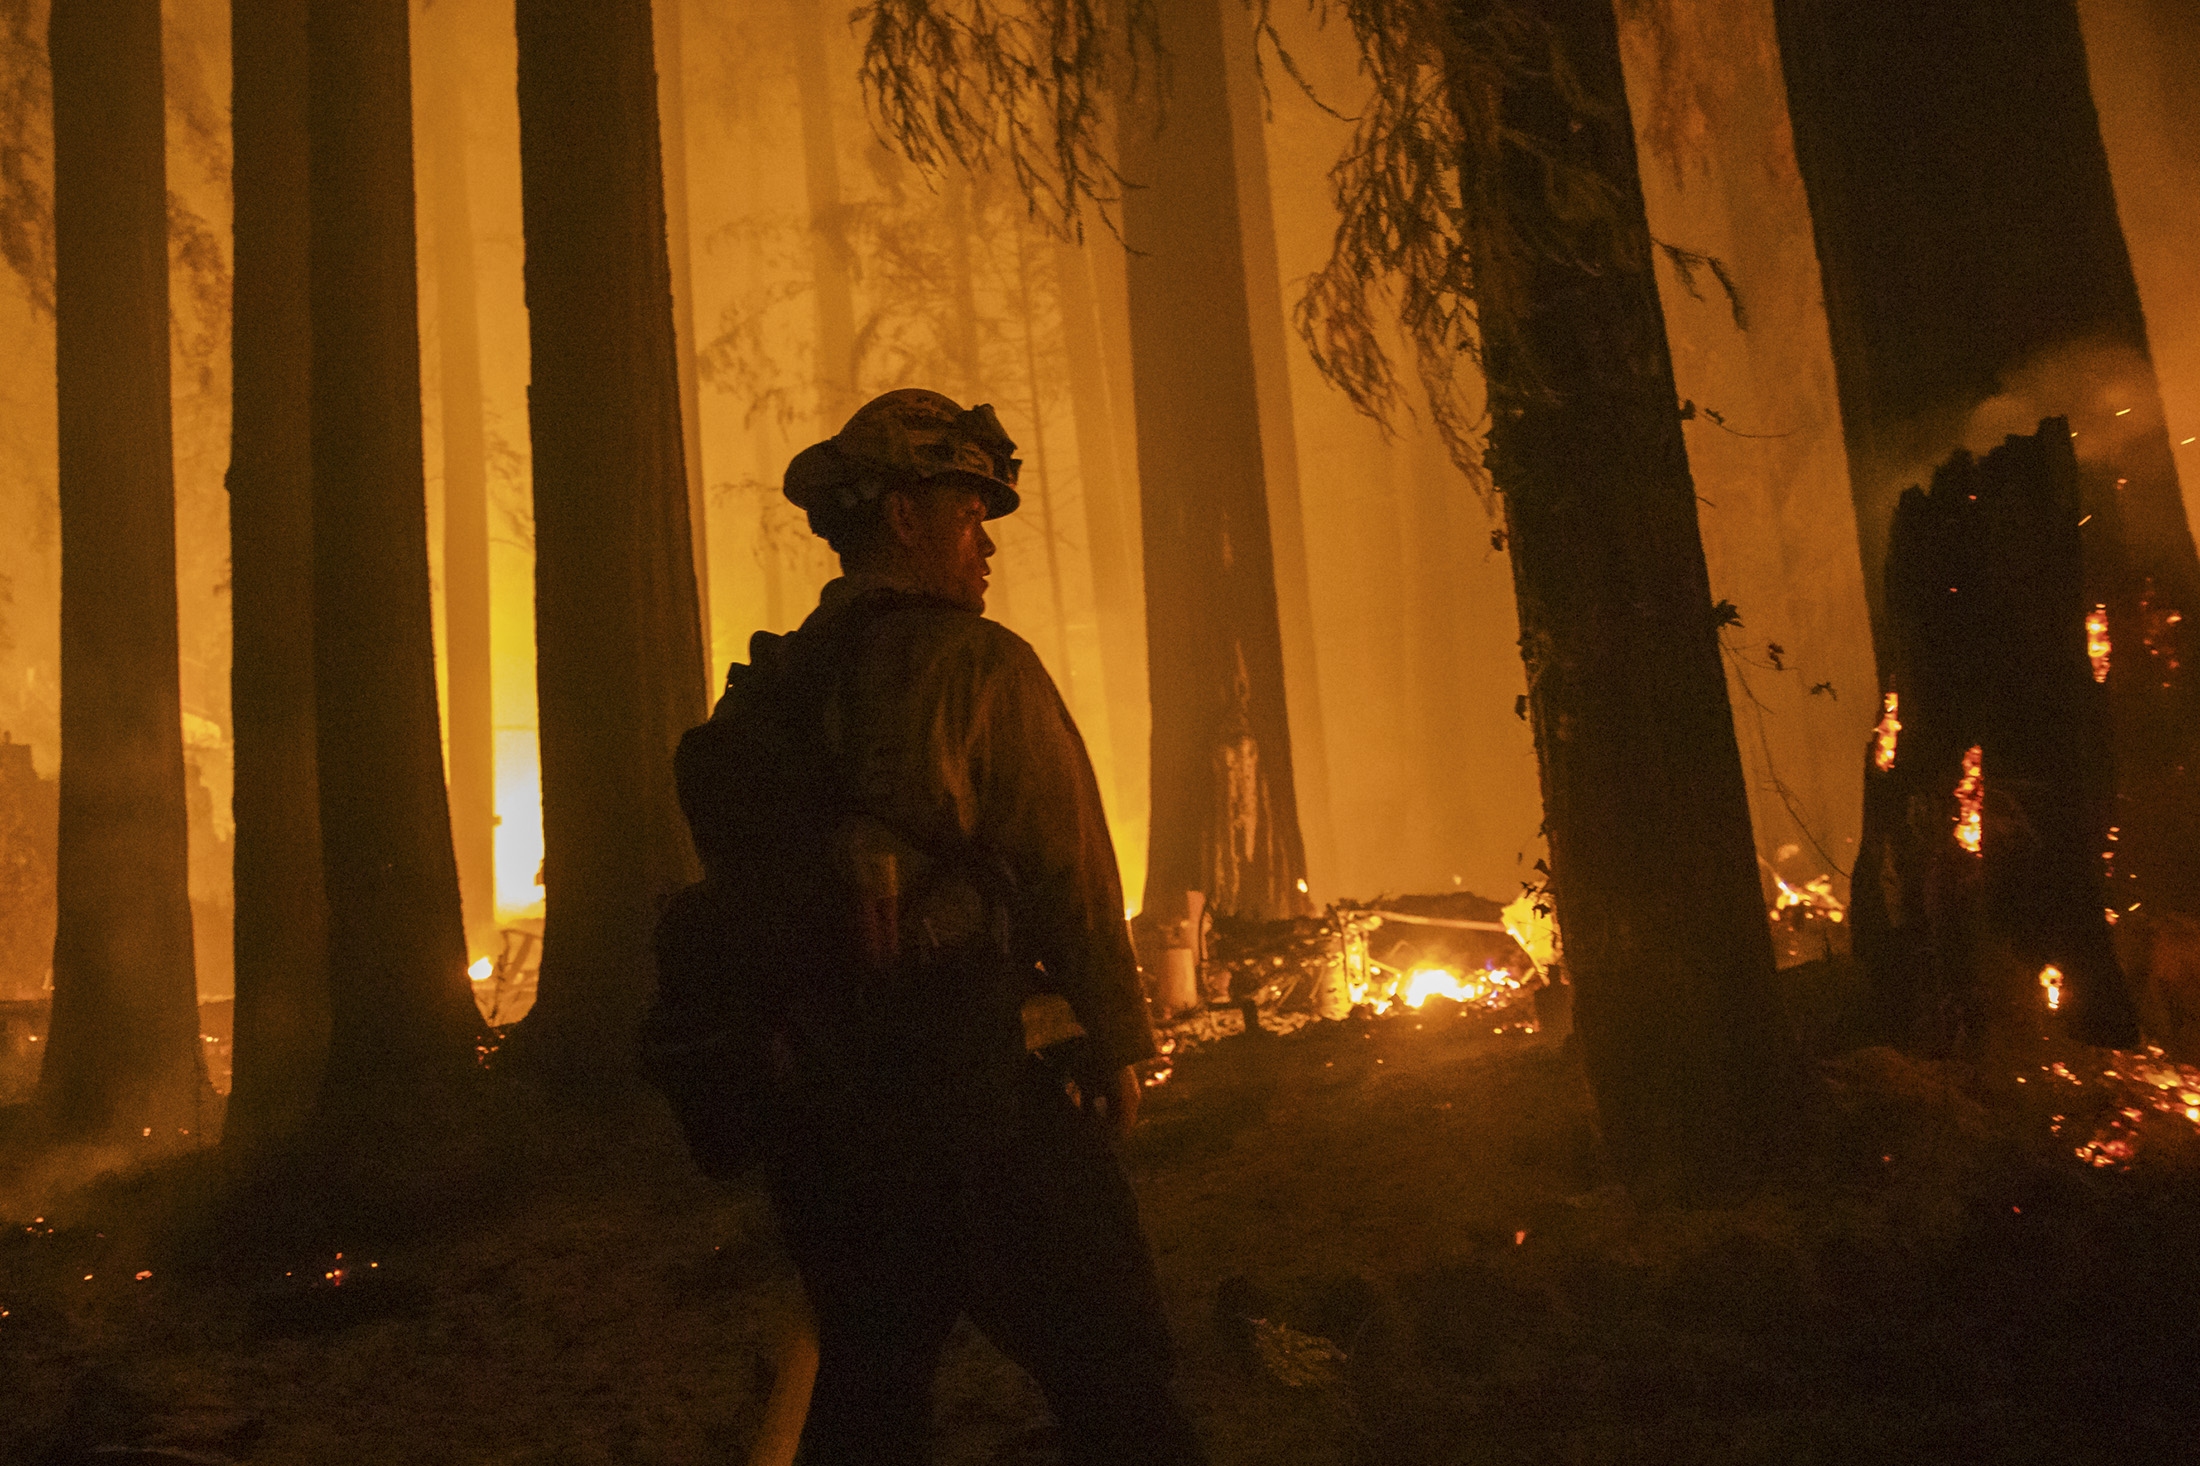 A firefighter with the Jameson Creek CDF station fights a fire on a property on Acorn Drive during the CZU Lightning Complex fire in Santa Cruz County, California, U.S., on Thursday, Aug. 20, 2020. More than 360 blazes are burning in California, forcing mass evacuations in the northern part of the state and creating an air quality emergency.